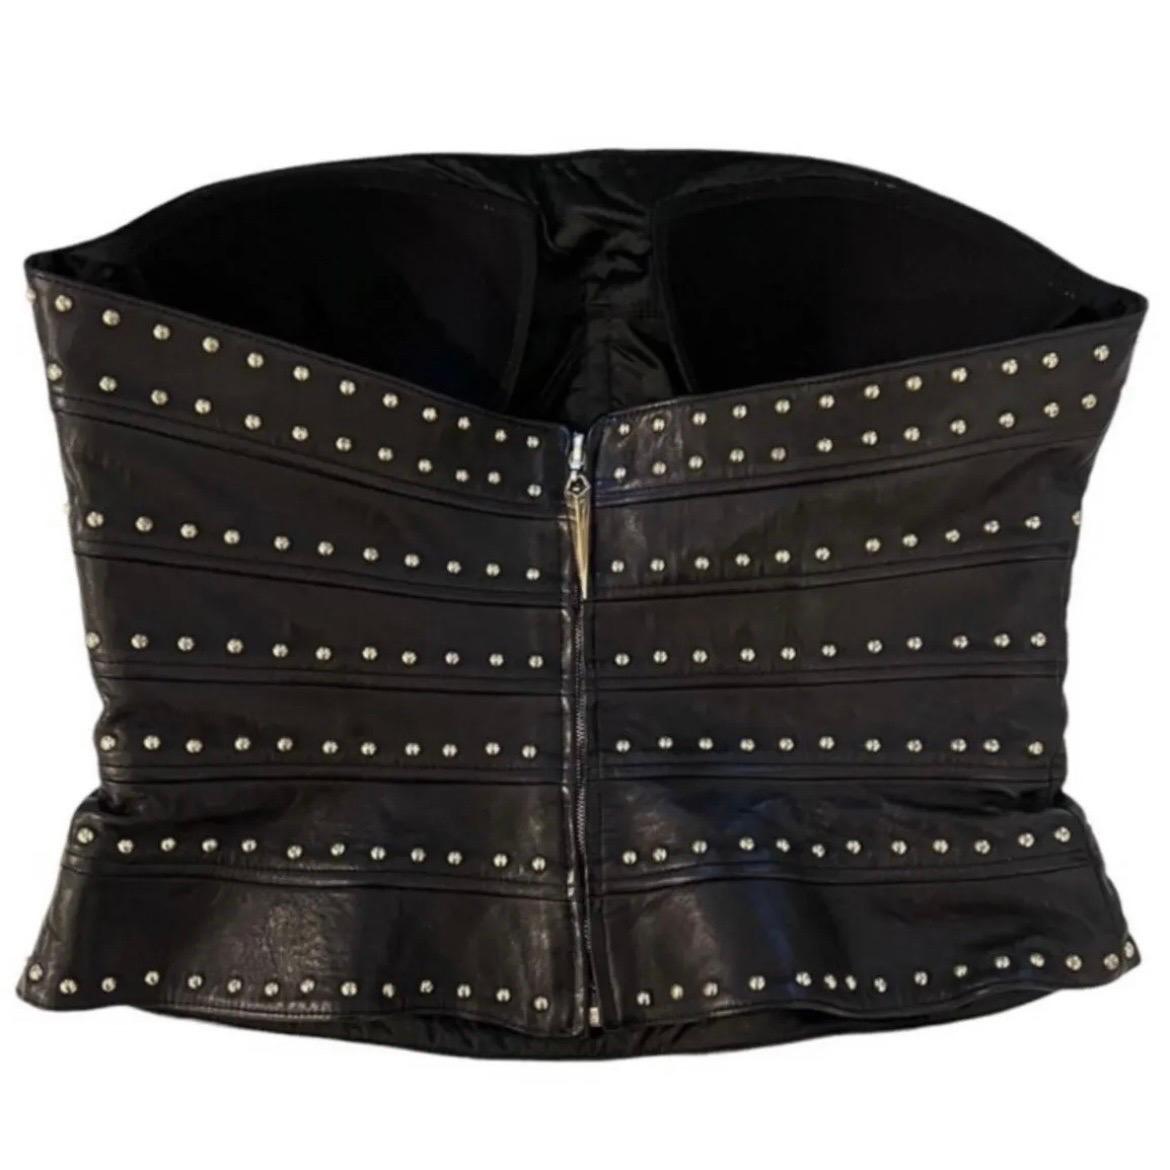 1990s Thierry Mugler Black Leather Studded Strapless Bustier Corset For Sale 1